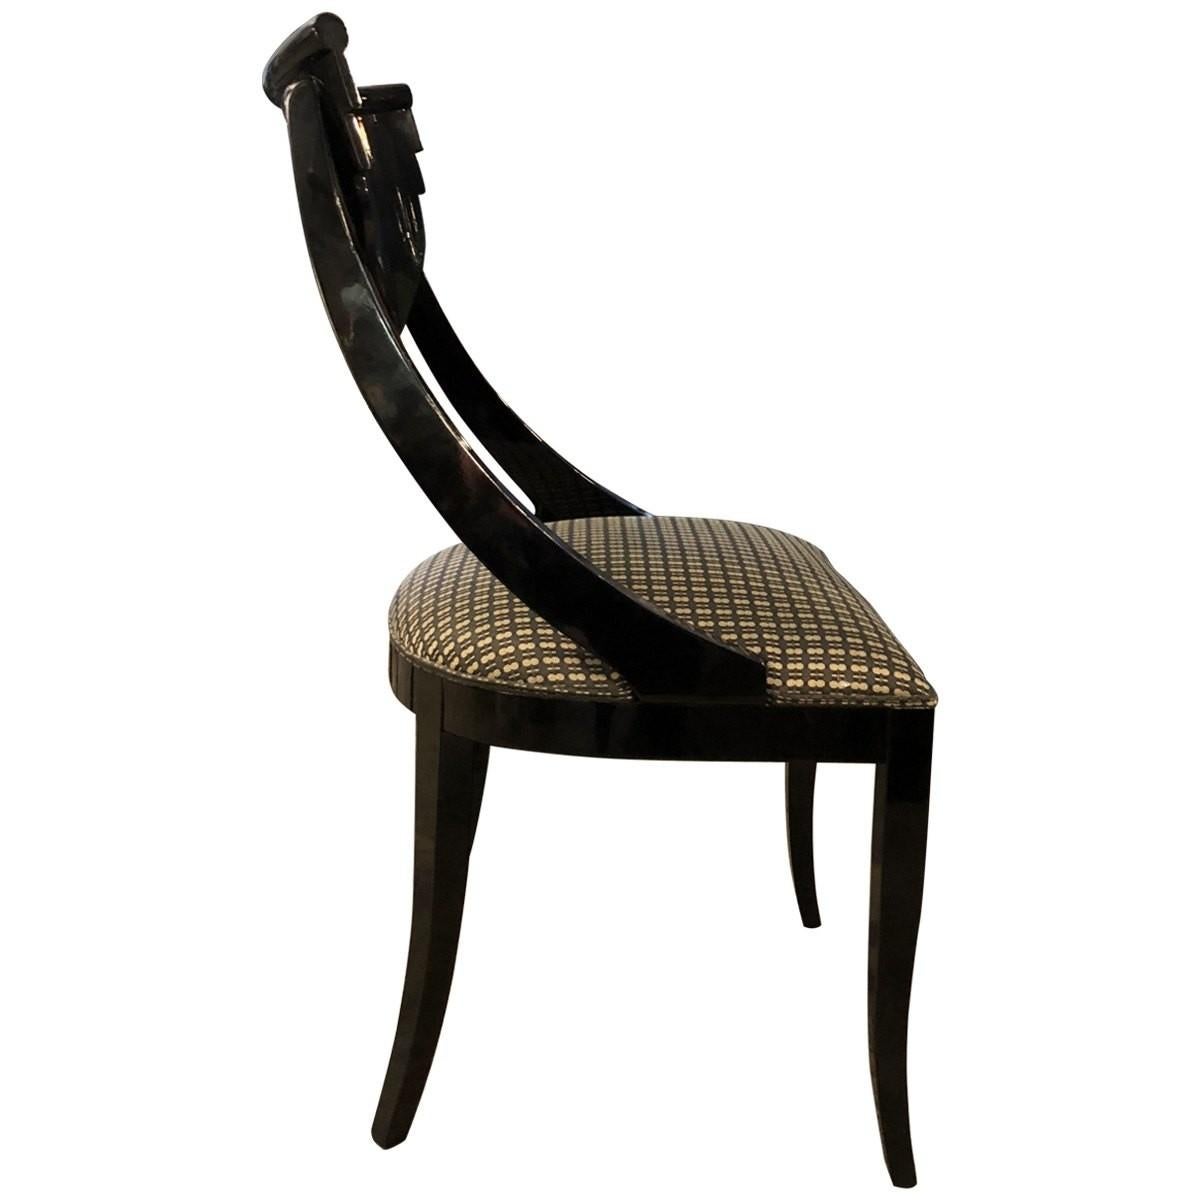 Pietro Costantini was founded in 1922, establishing itself as a leading company in the manufacturing and design of furniture with a timeless aesthetic. These Gondola style dining chairs are constructed with black lacquered wood frames with black,